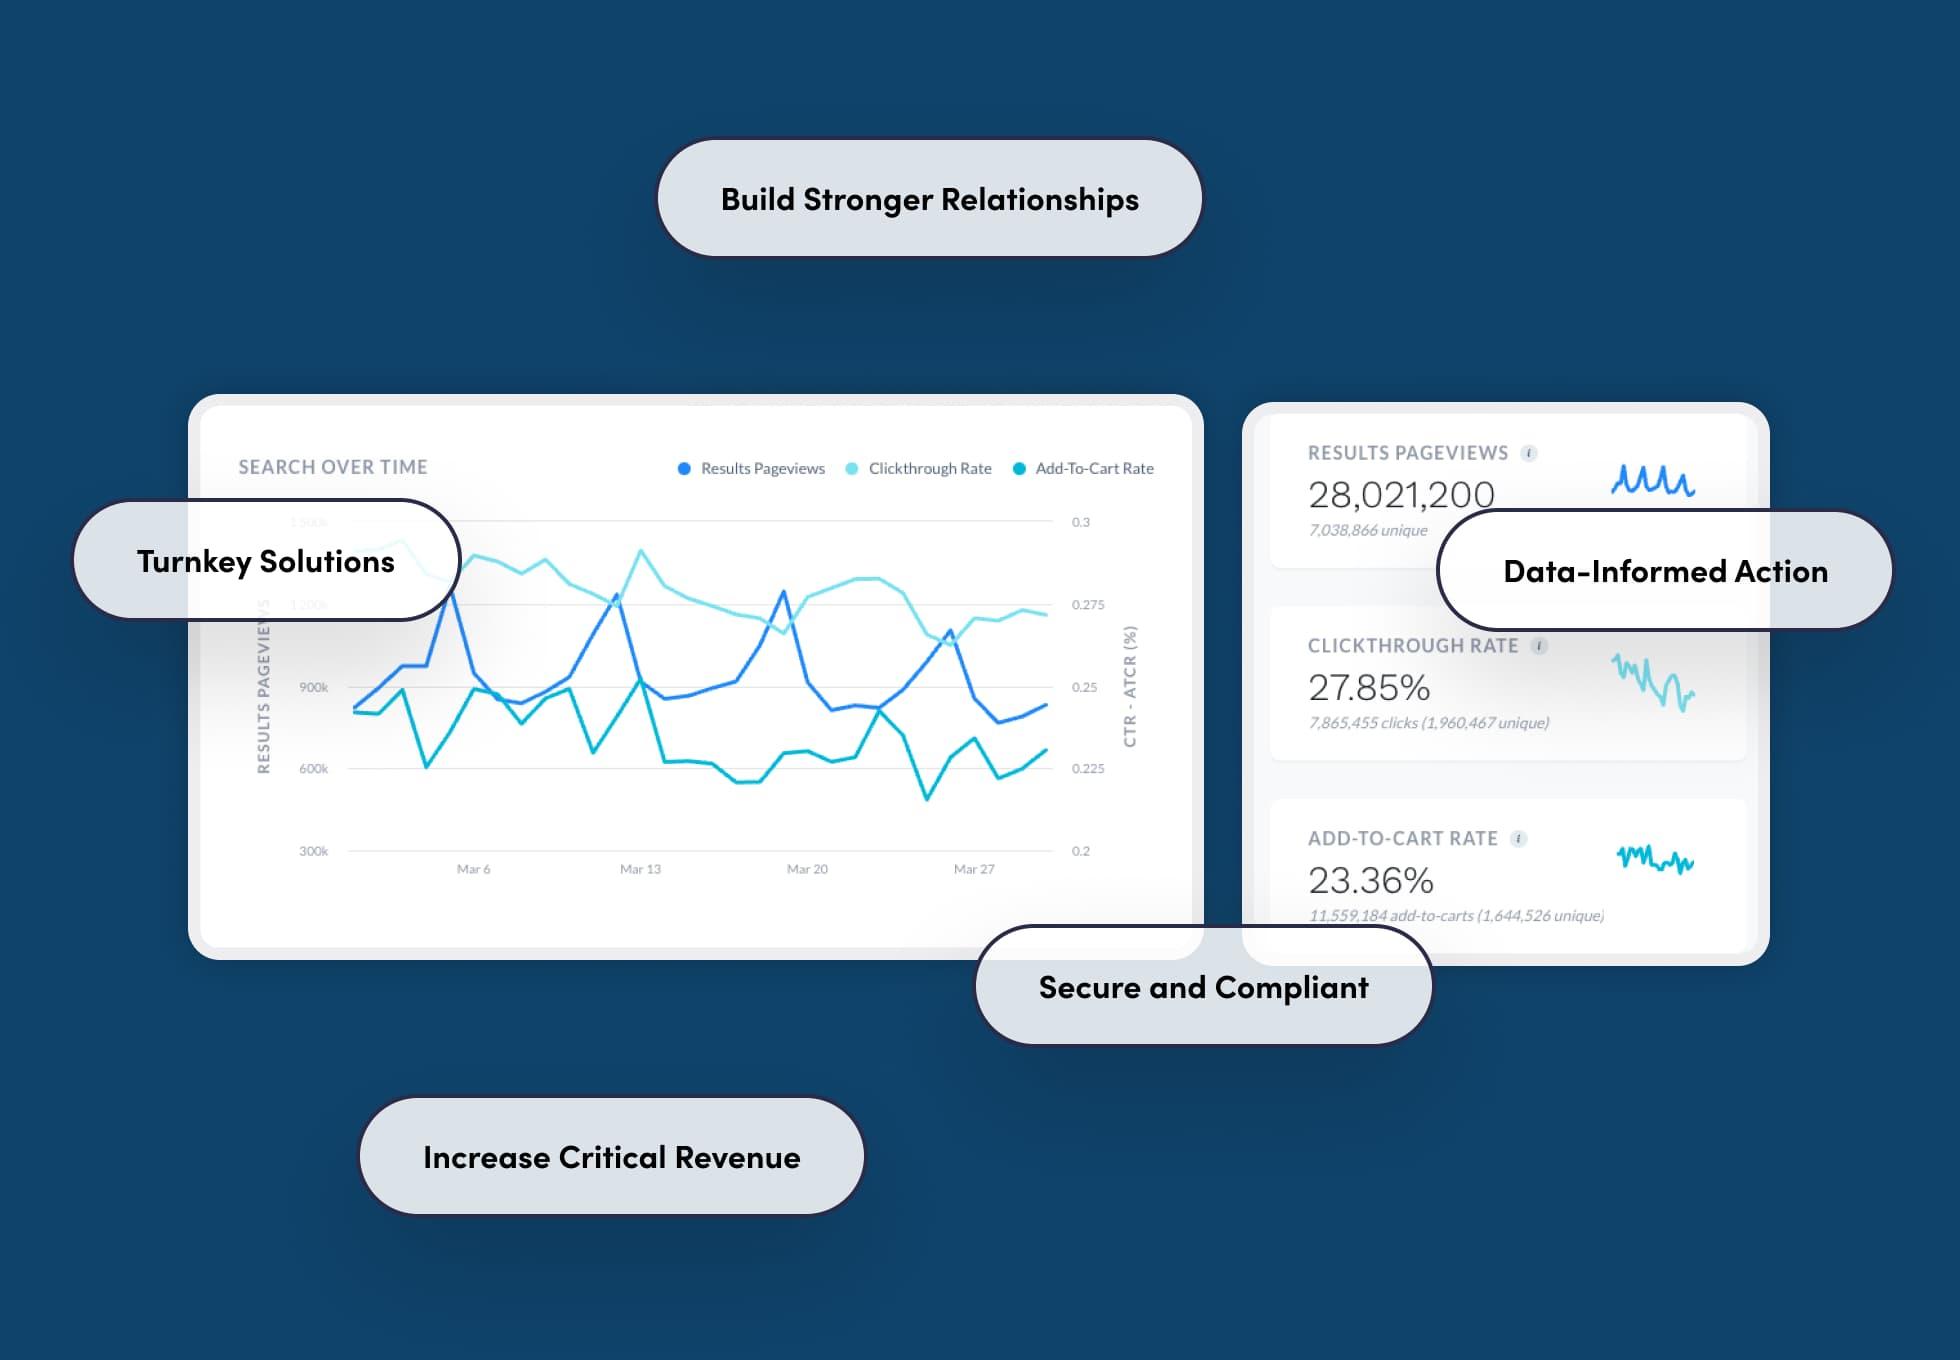 Screenshots of charts and statistics from the Constructor platform with words around the charts that say: Build stronger relationships, turnkey solutions, increase critical revenue, secure and compliant, and data-informed action.